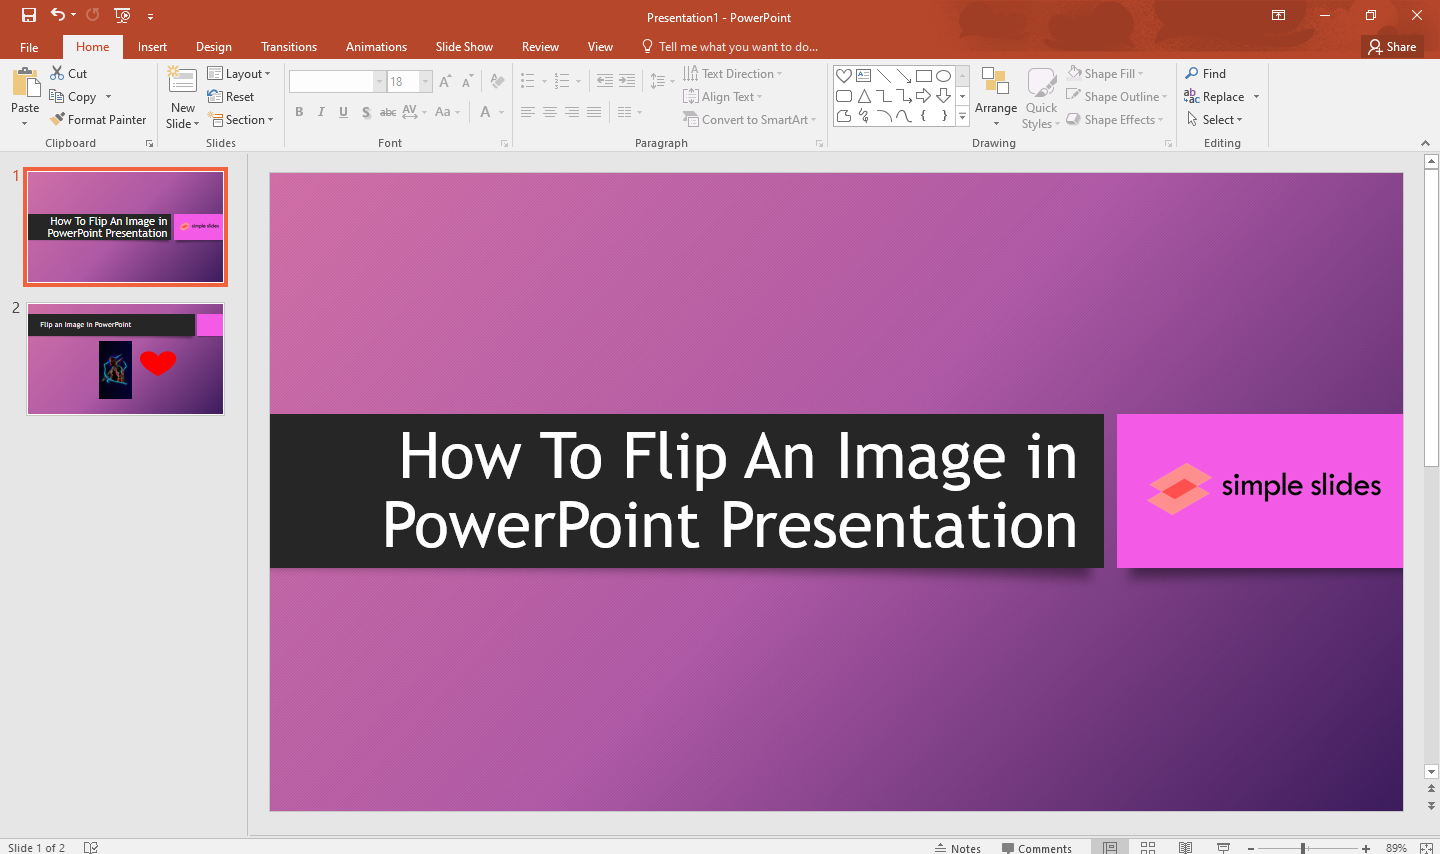 Open your MS PowerPoint